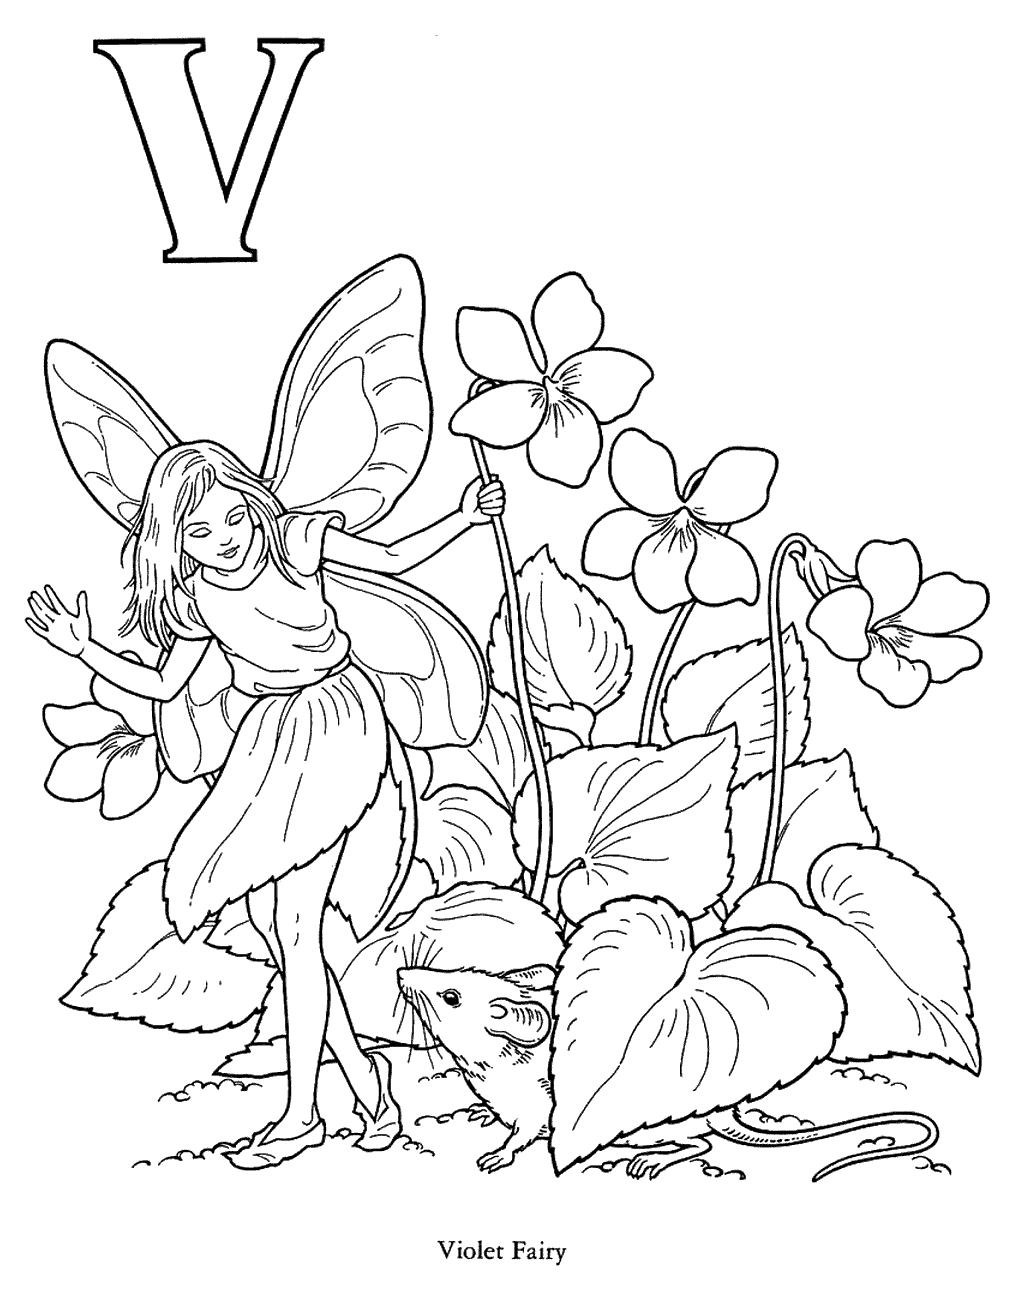 Violet Fairy Coloring Page